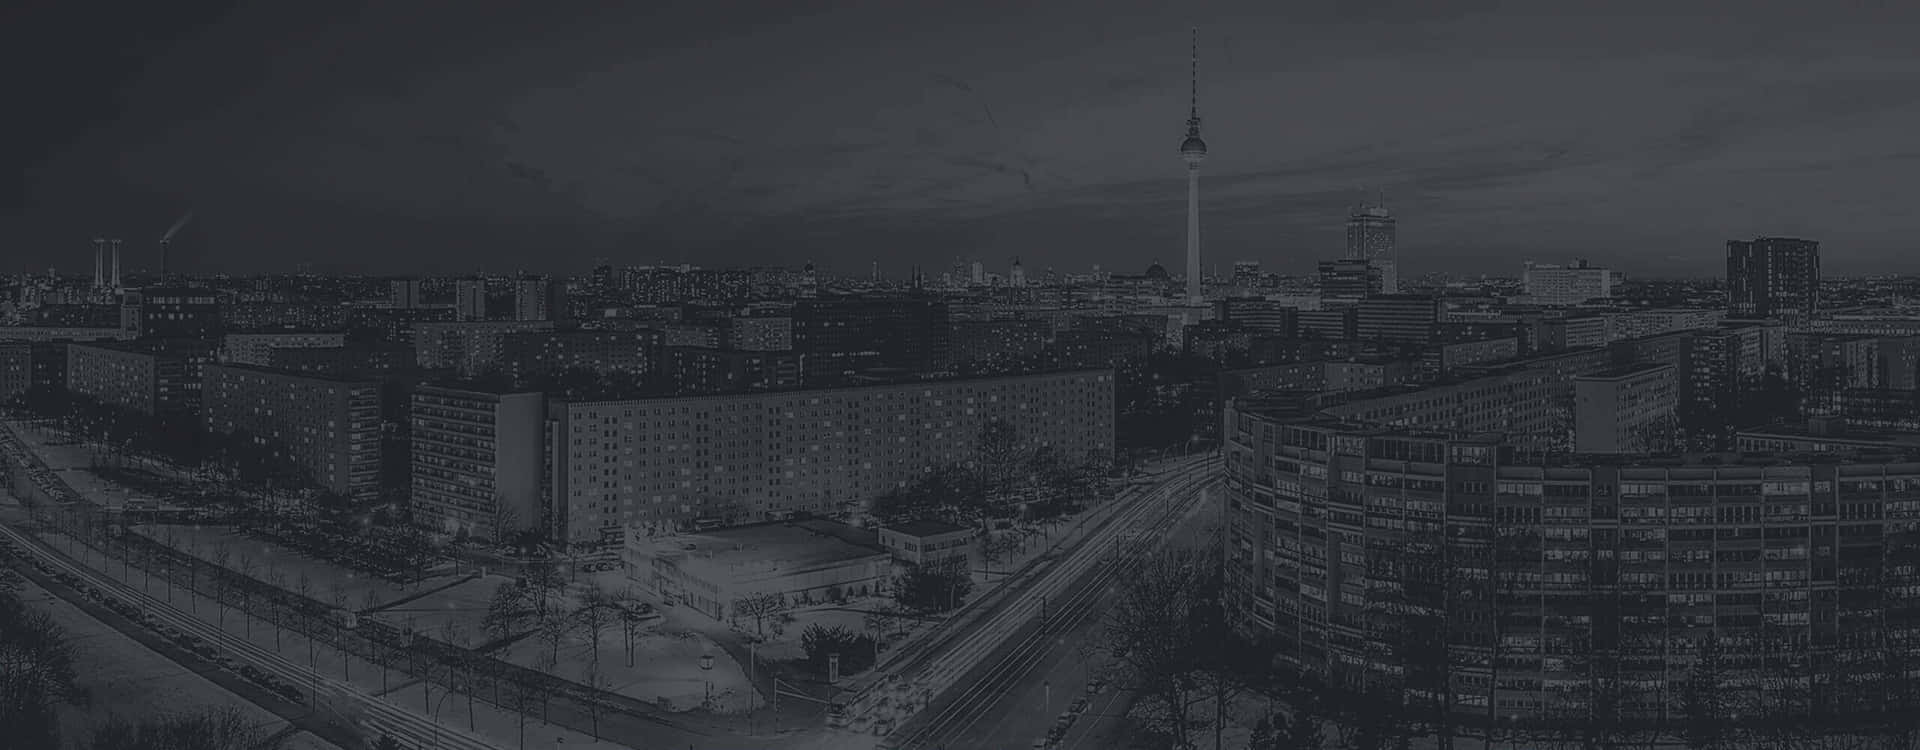 Berlin Skyline At Night With The Words Berlin Tv Tower Wallpaper